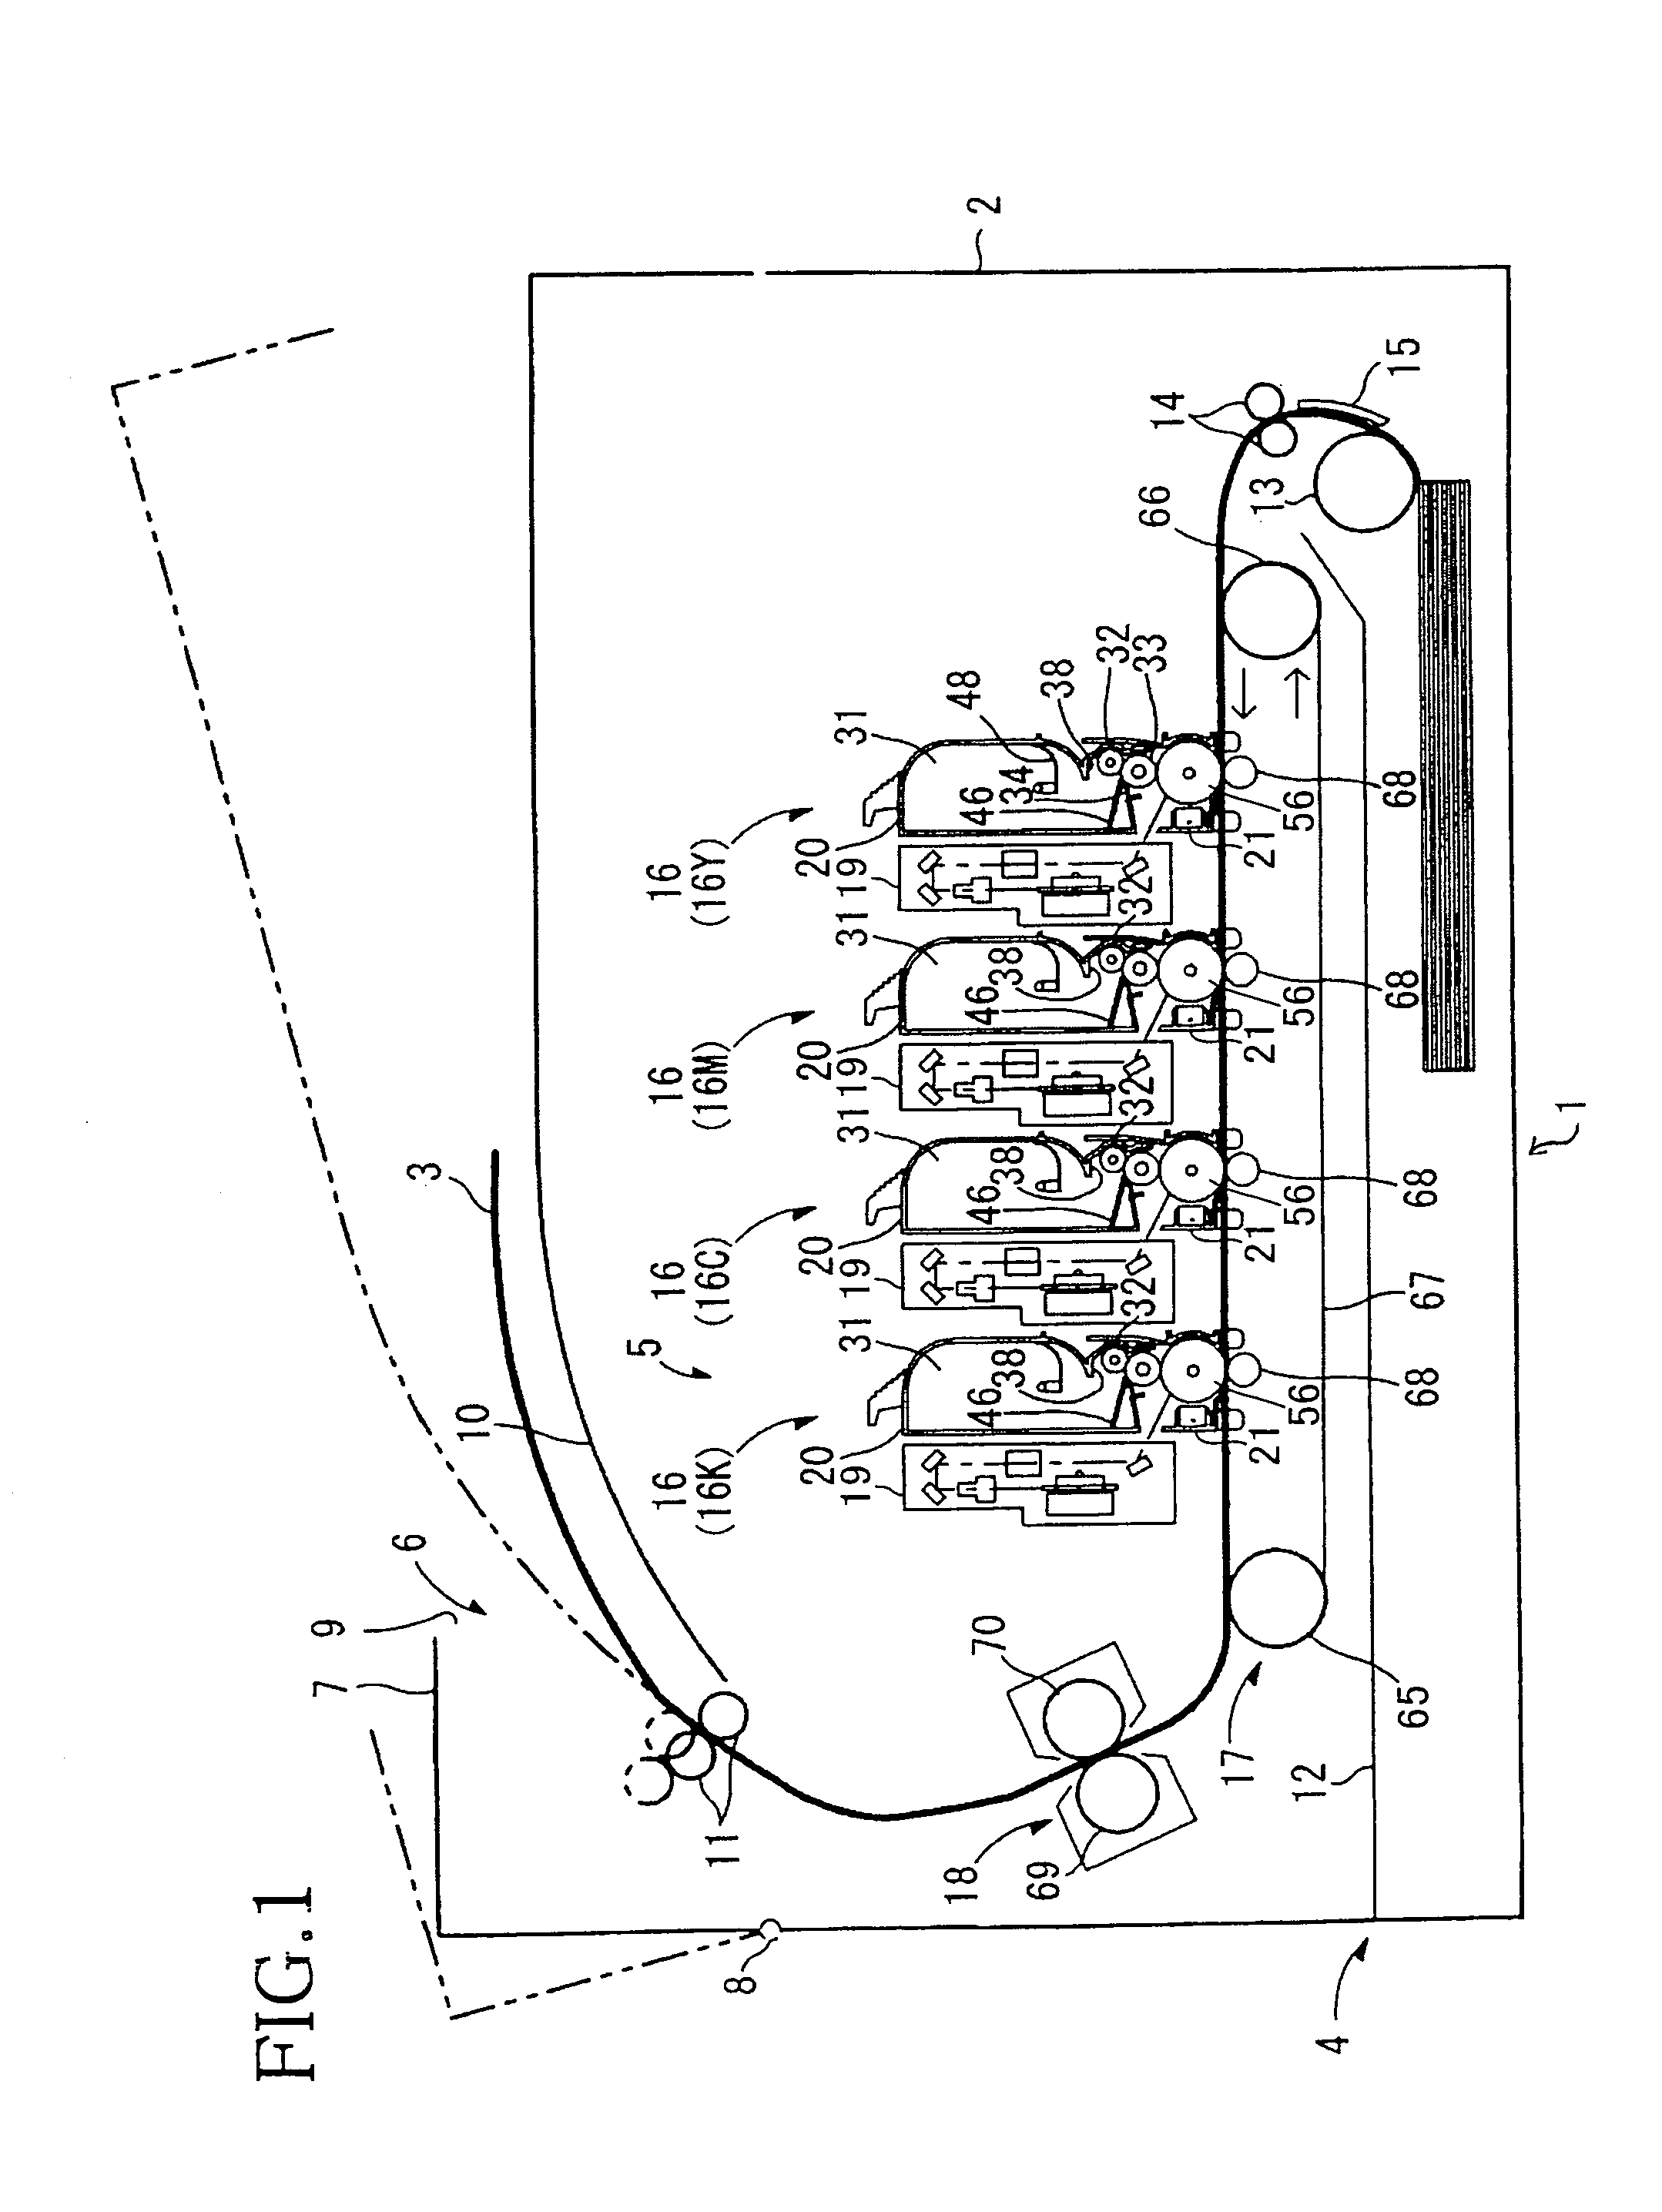 Image forming apparatus for a color laser printer for transferring a higher transfer efficiency on a recording sheet on the upstream side of the imaging forming process